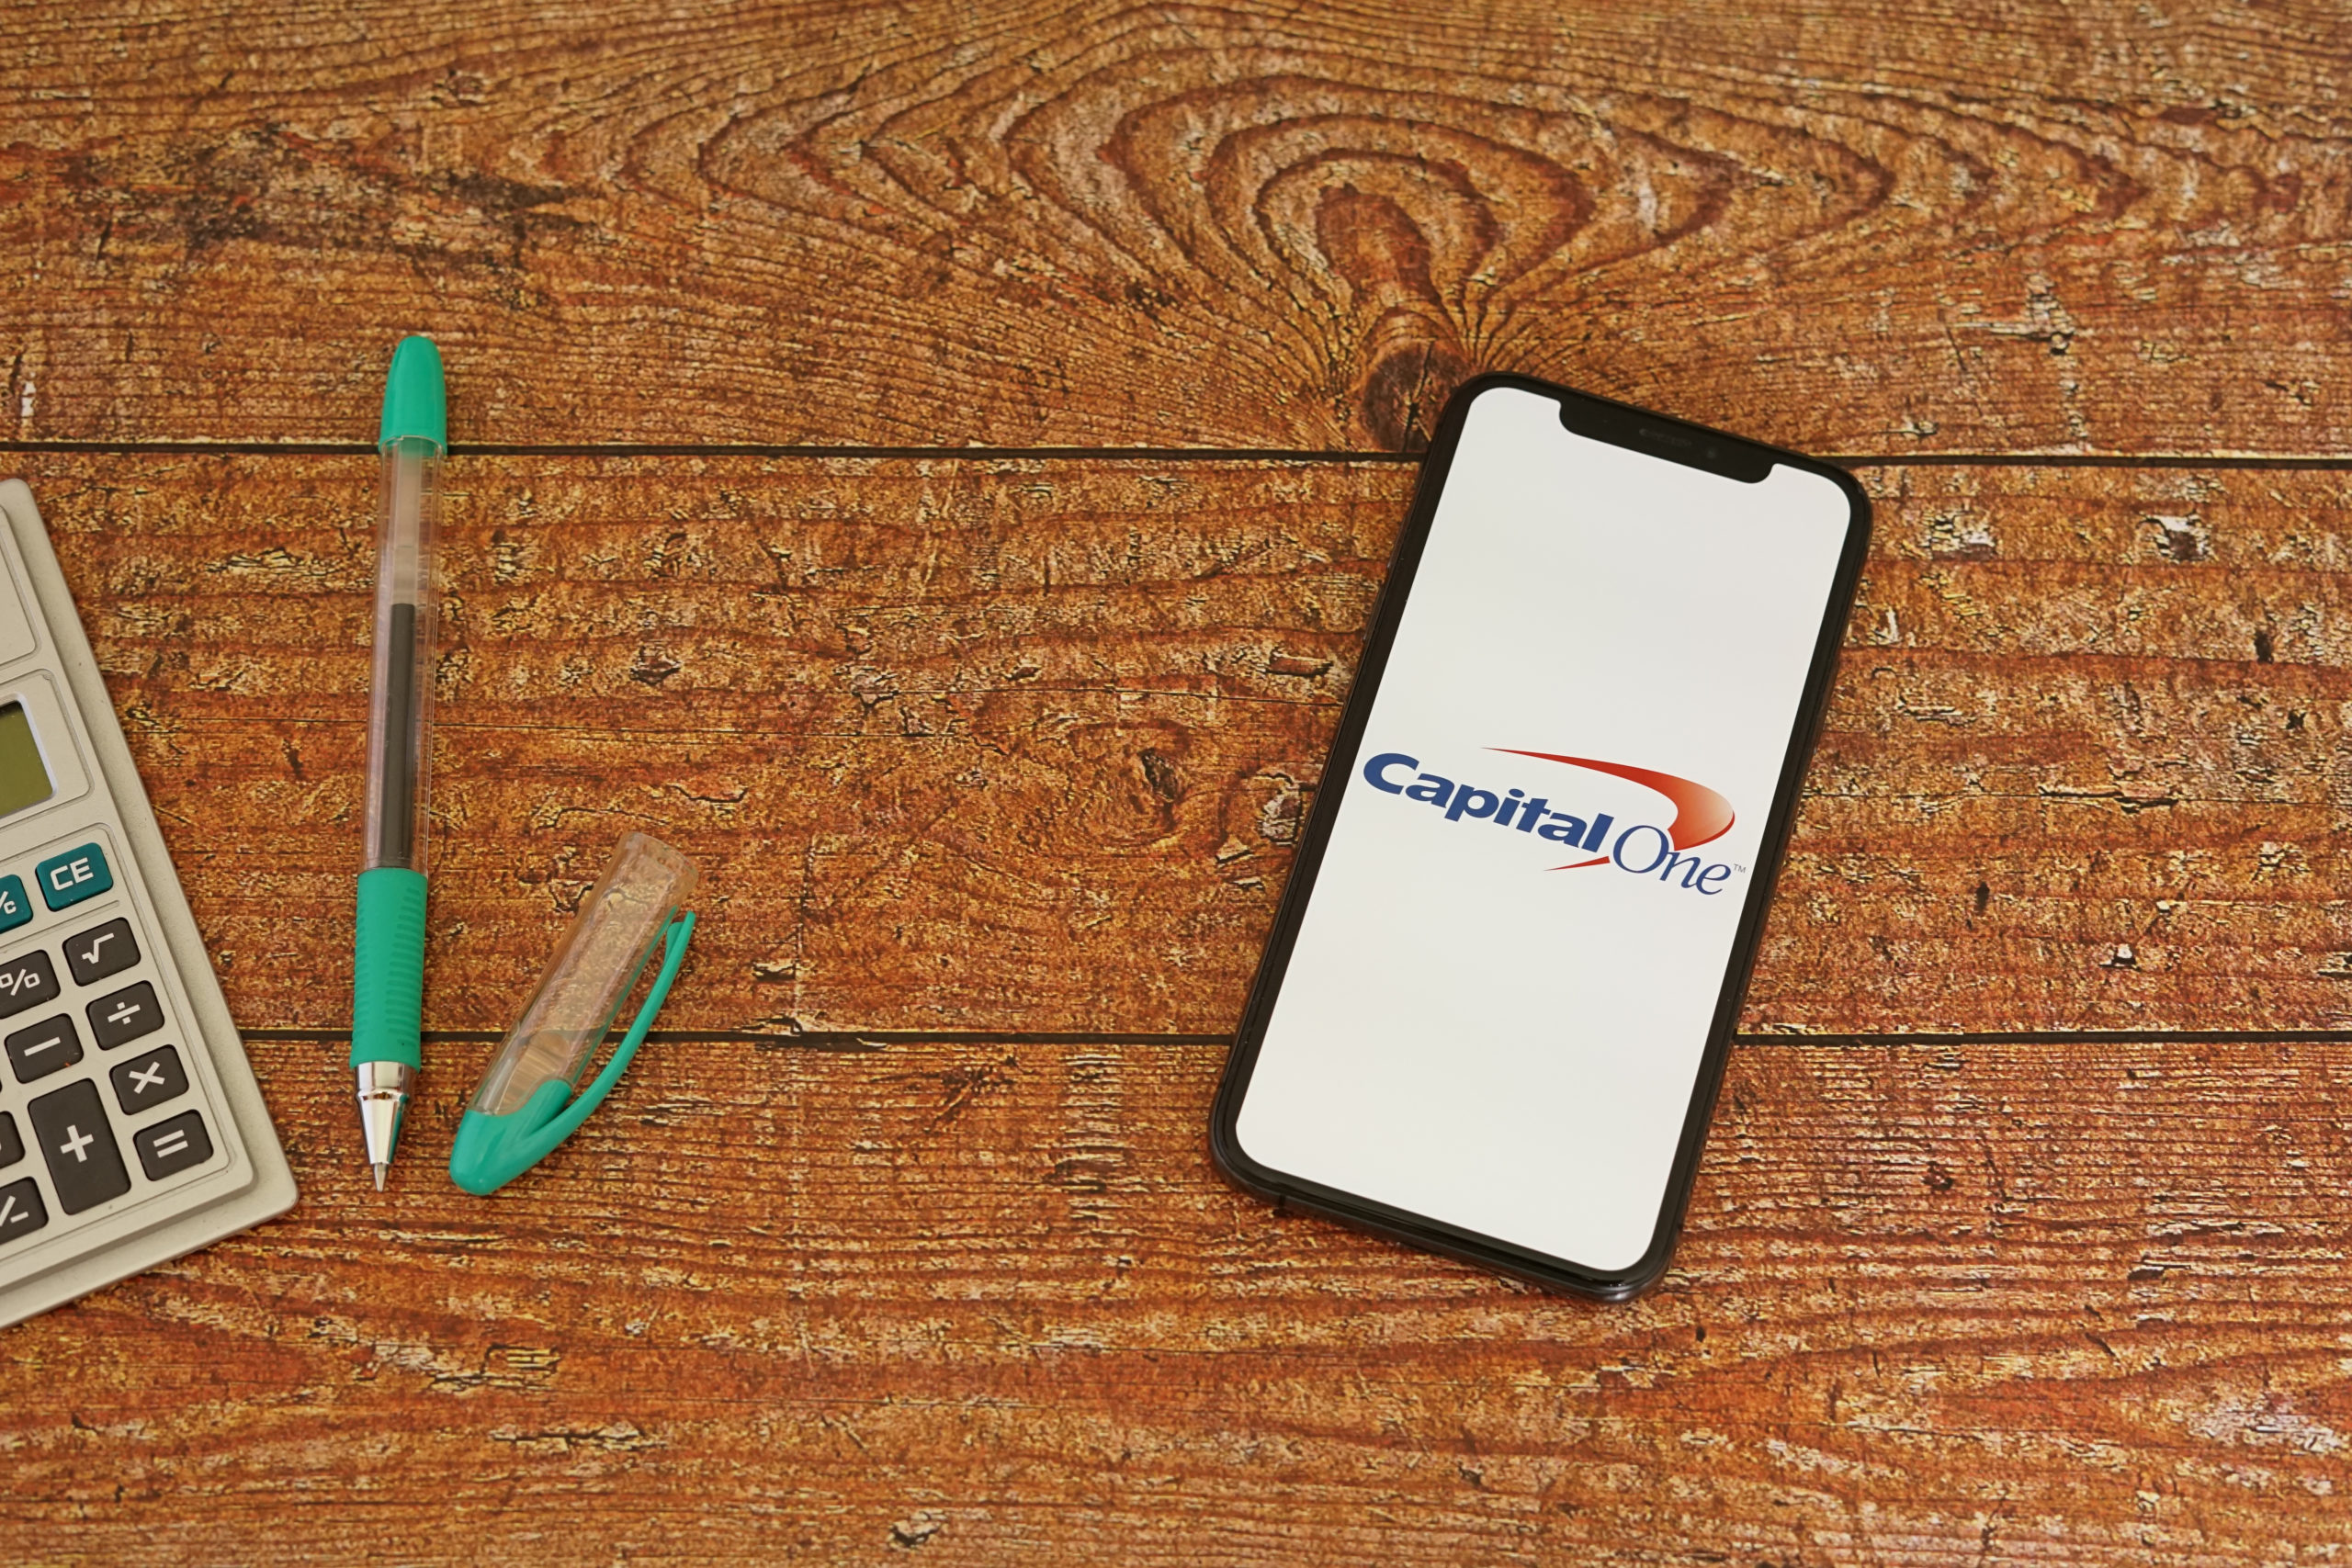 Capital One Loans Review and Best Alternatives